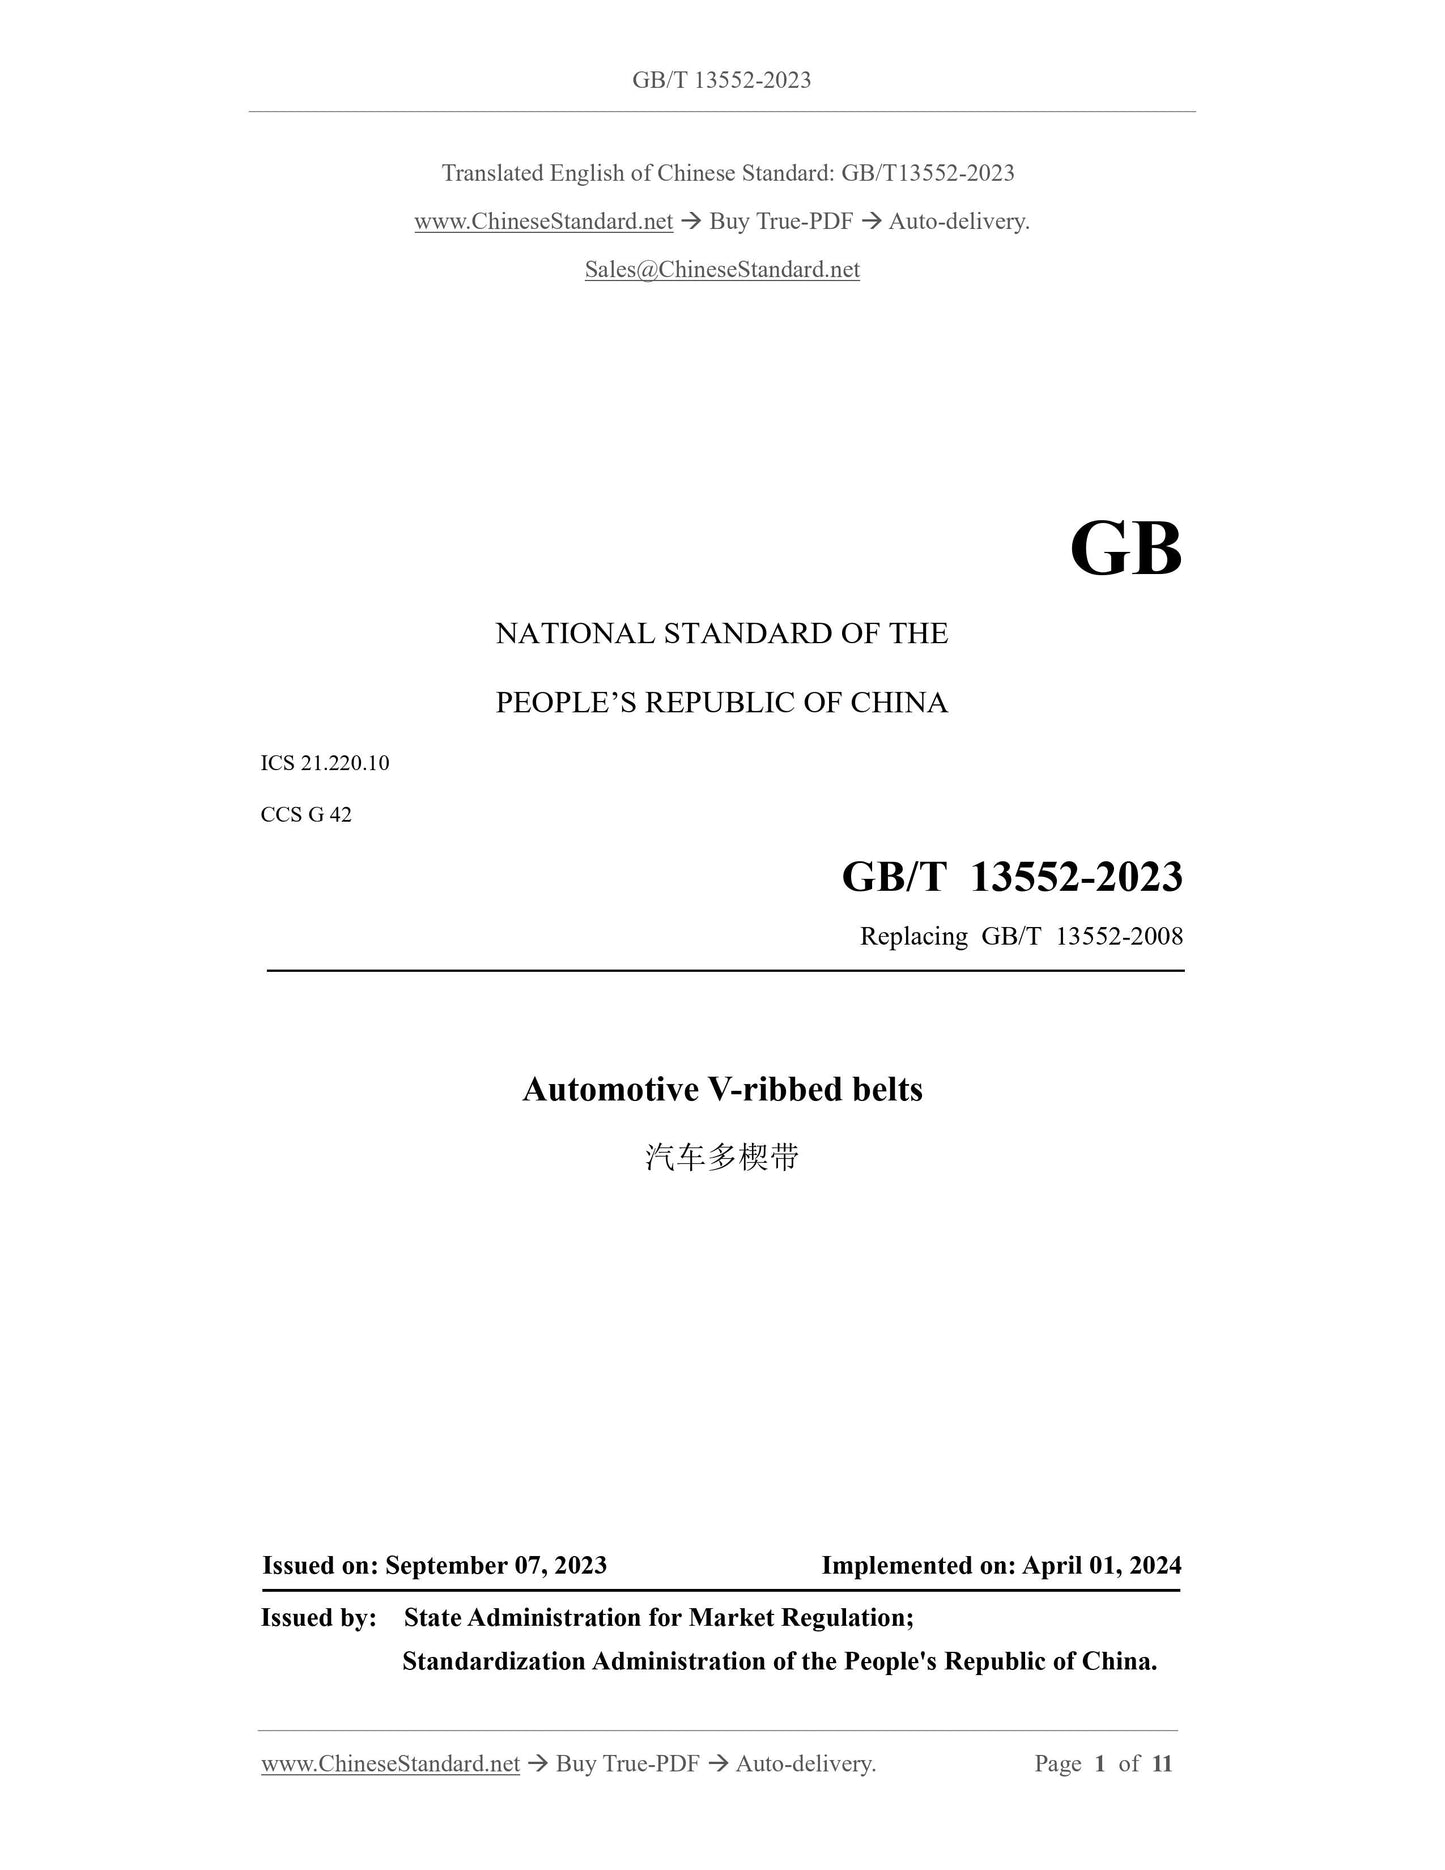 GB/T 13552-2023 Page 1